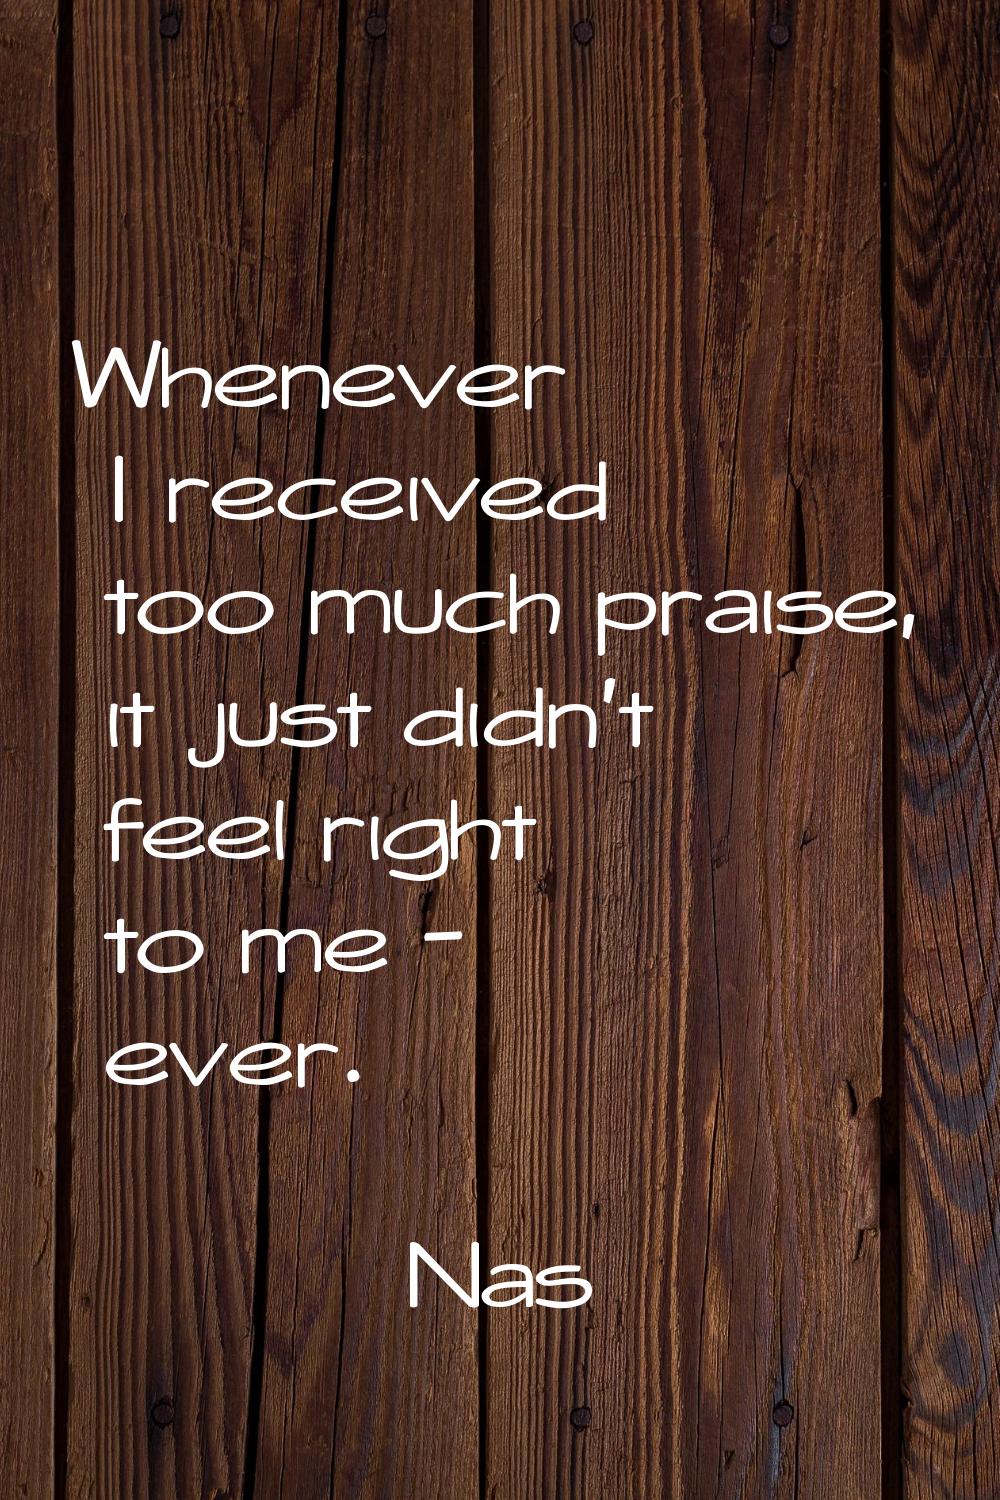 Whenever I received too much praise, it just didn't feel right to me - ever.